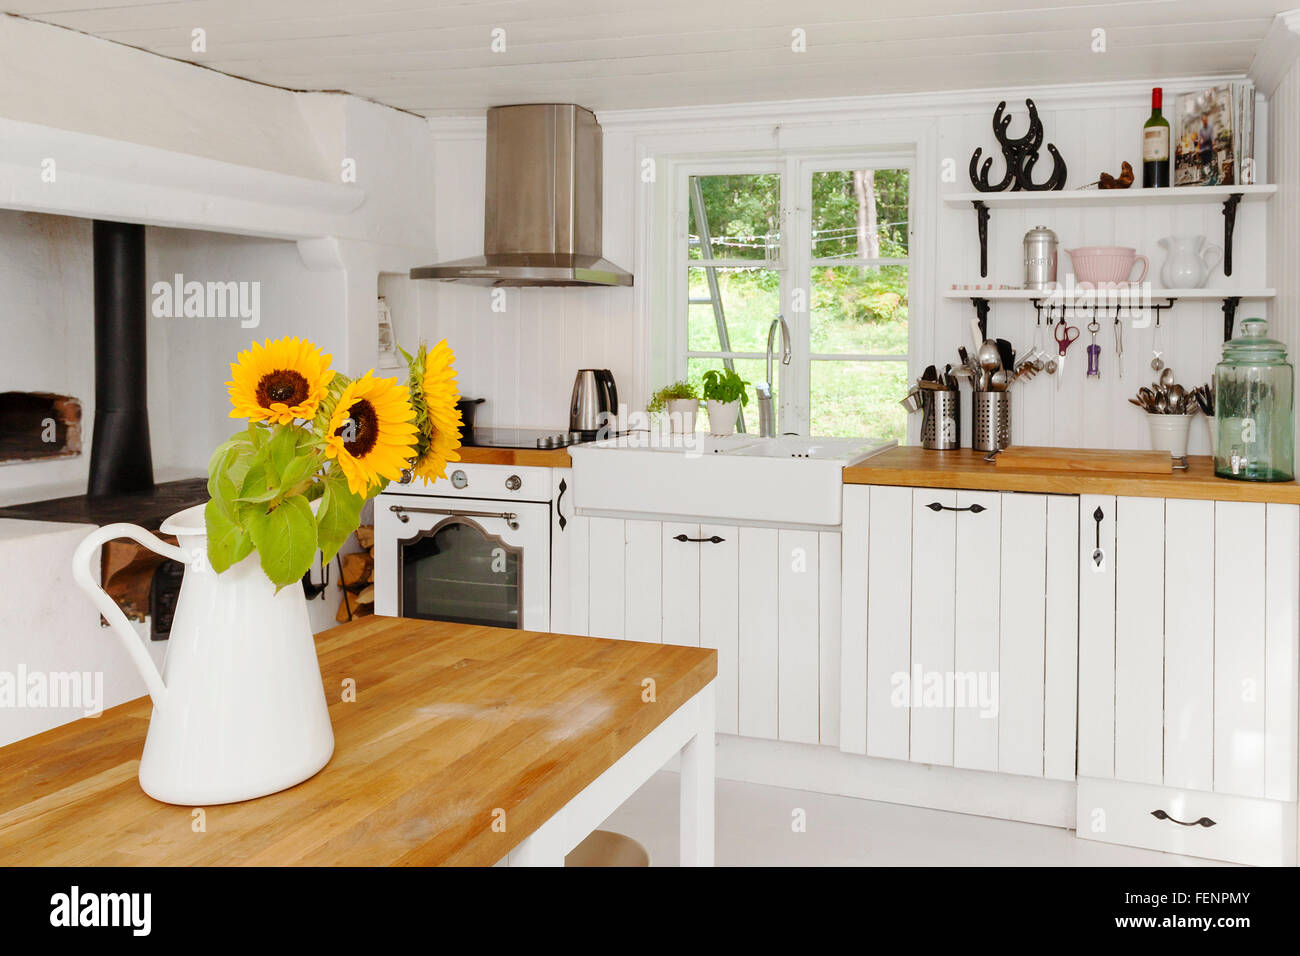 https://c8.alamy.com/comp/FENPMY/interior-of-a-country-house-kitchen-with-sunfloser-at-ta-kitchen-table-FENPMY.jpg